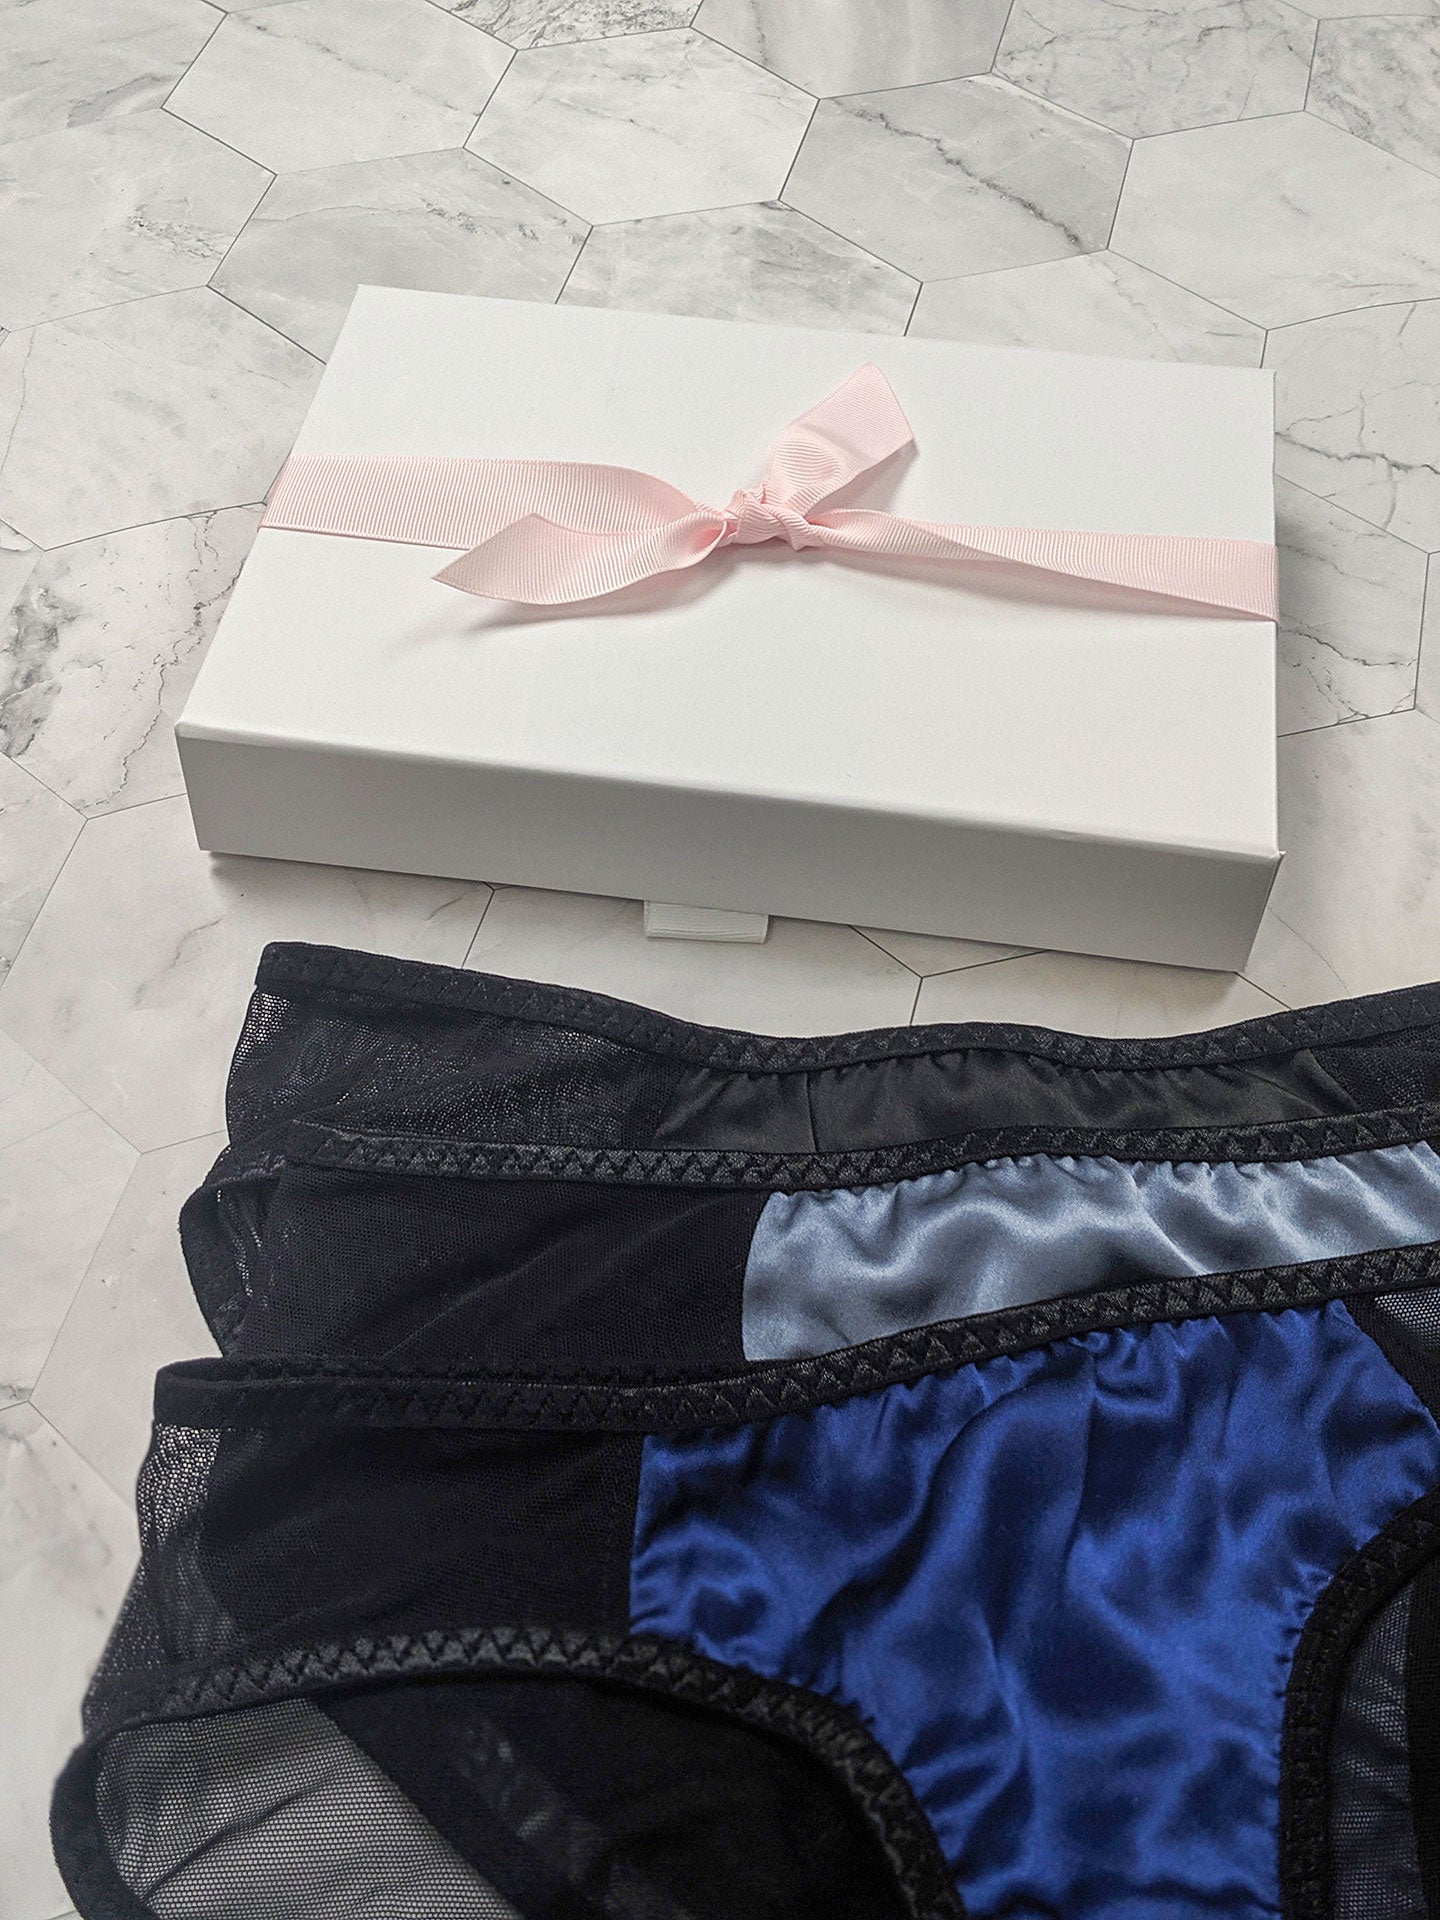 Luxury blue lingerie set with white gift box